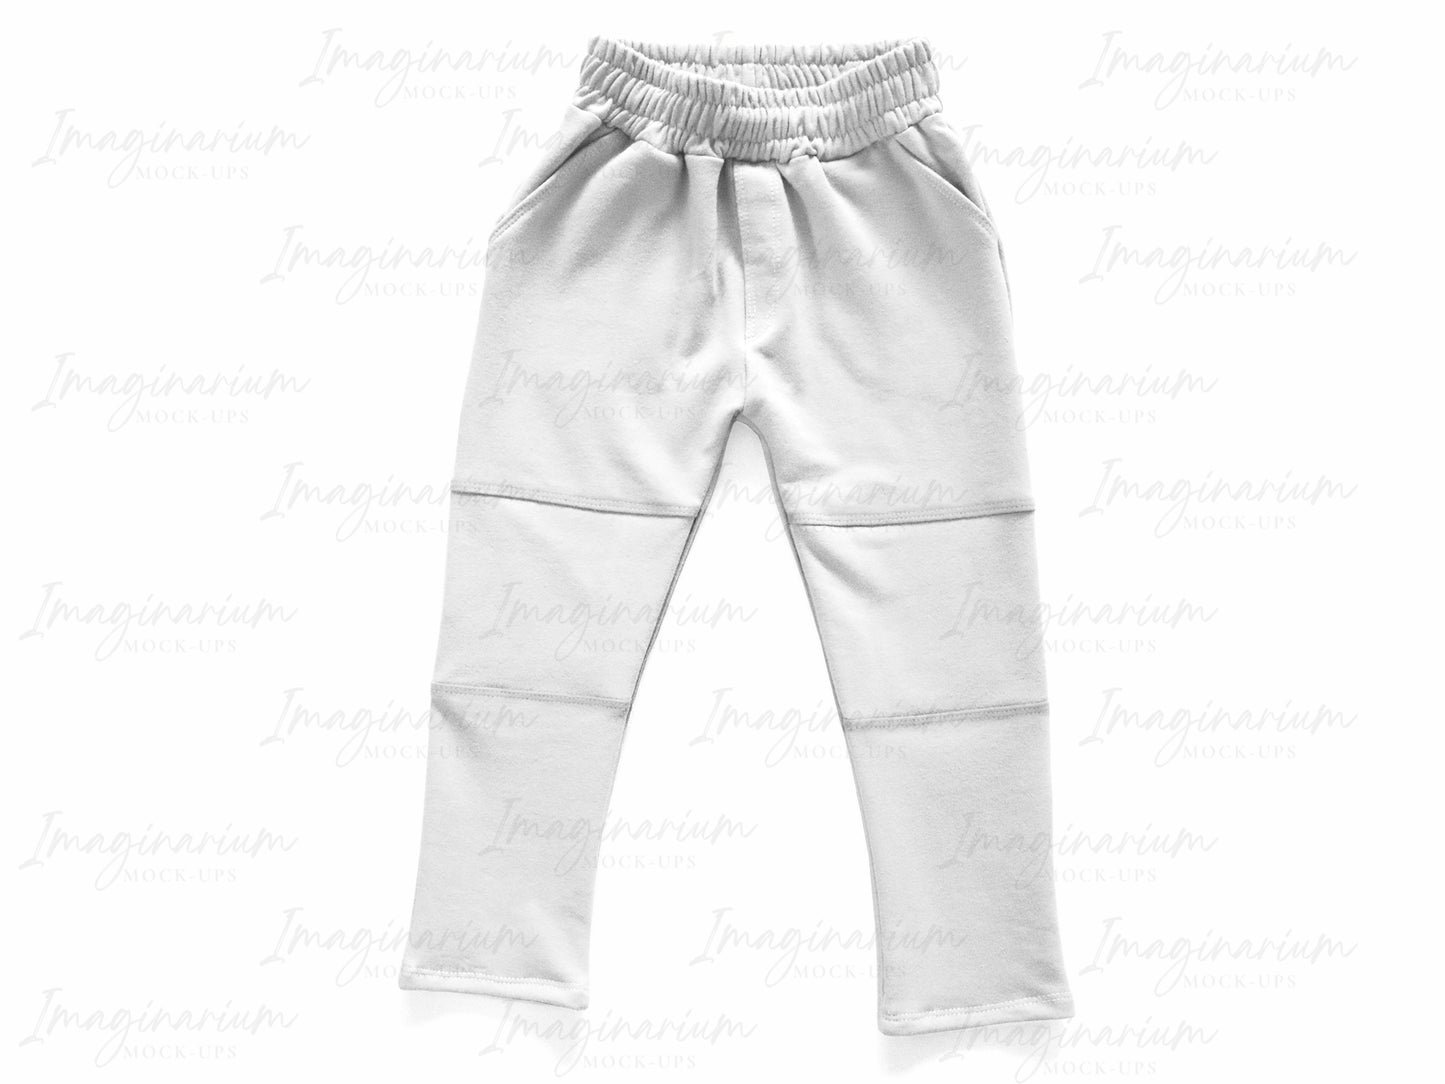 Gus & Steel Play Pants Mock Up, Realistic Clothing Mockup for Photoshop and Procreate